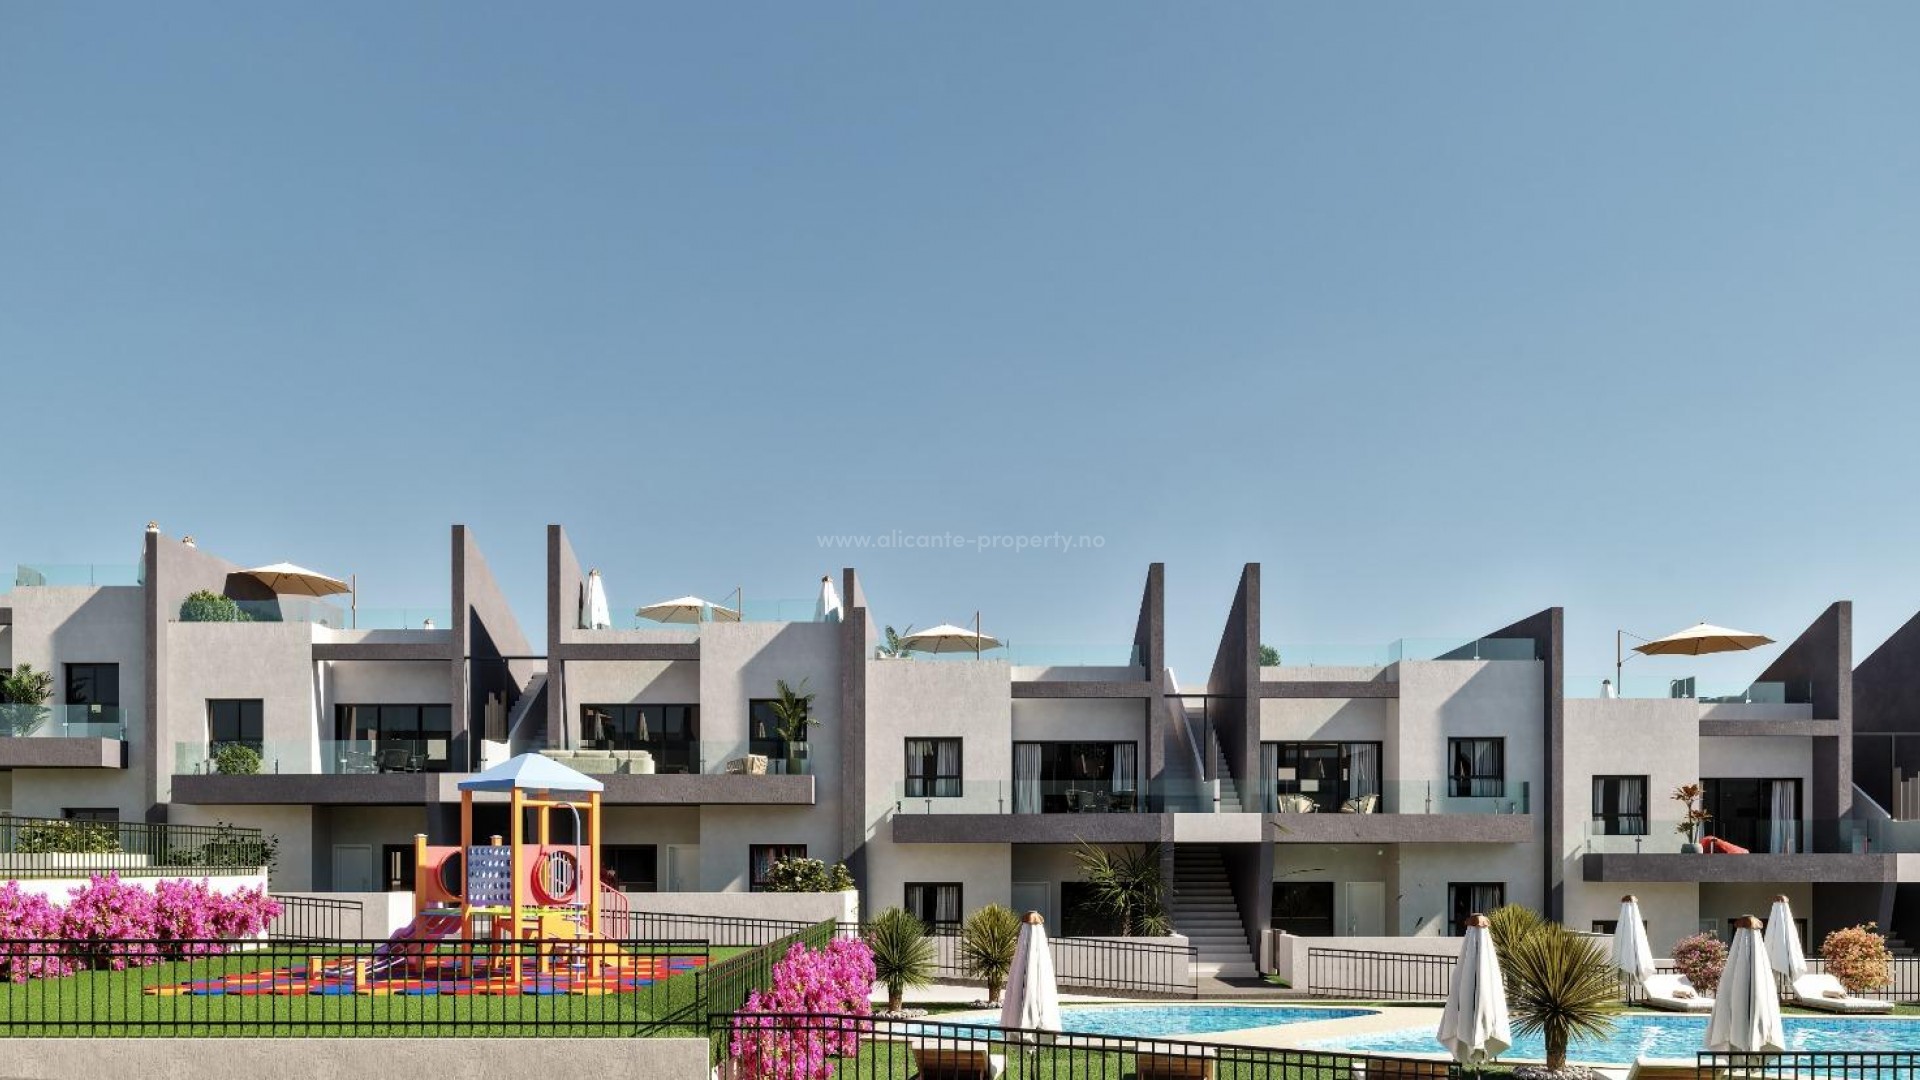 New bungalow apartments in San Miguel de Salinas, 2/3 bedrooms, 2 bathrooms, private garden and top floor with solarium, shared pool for adults and children